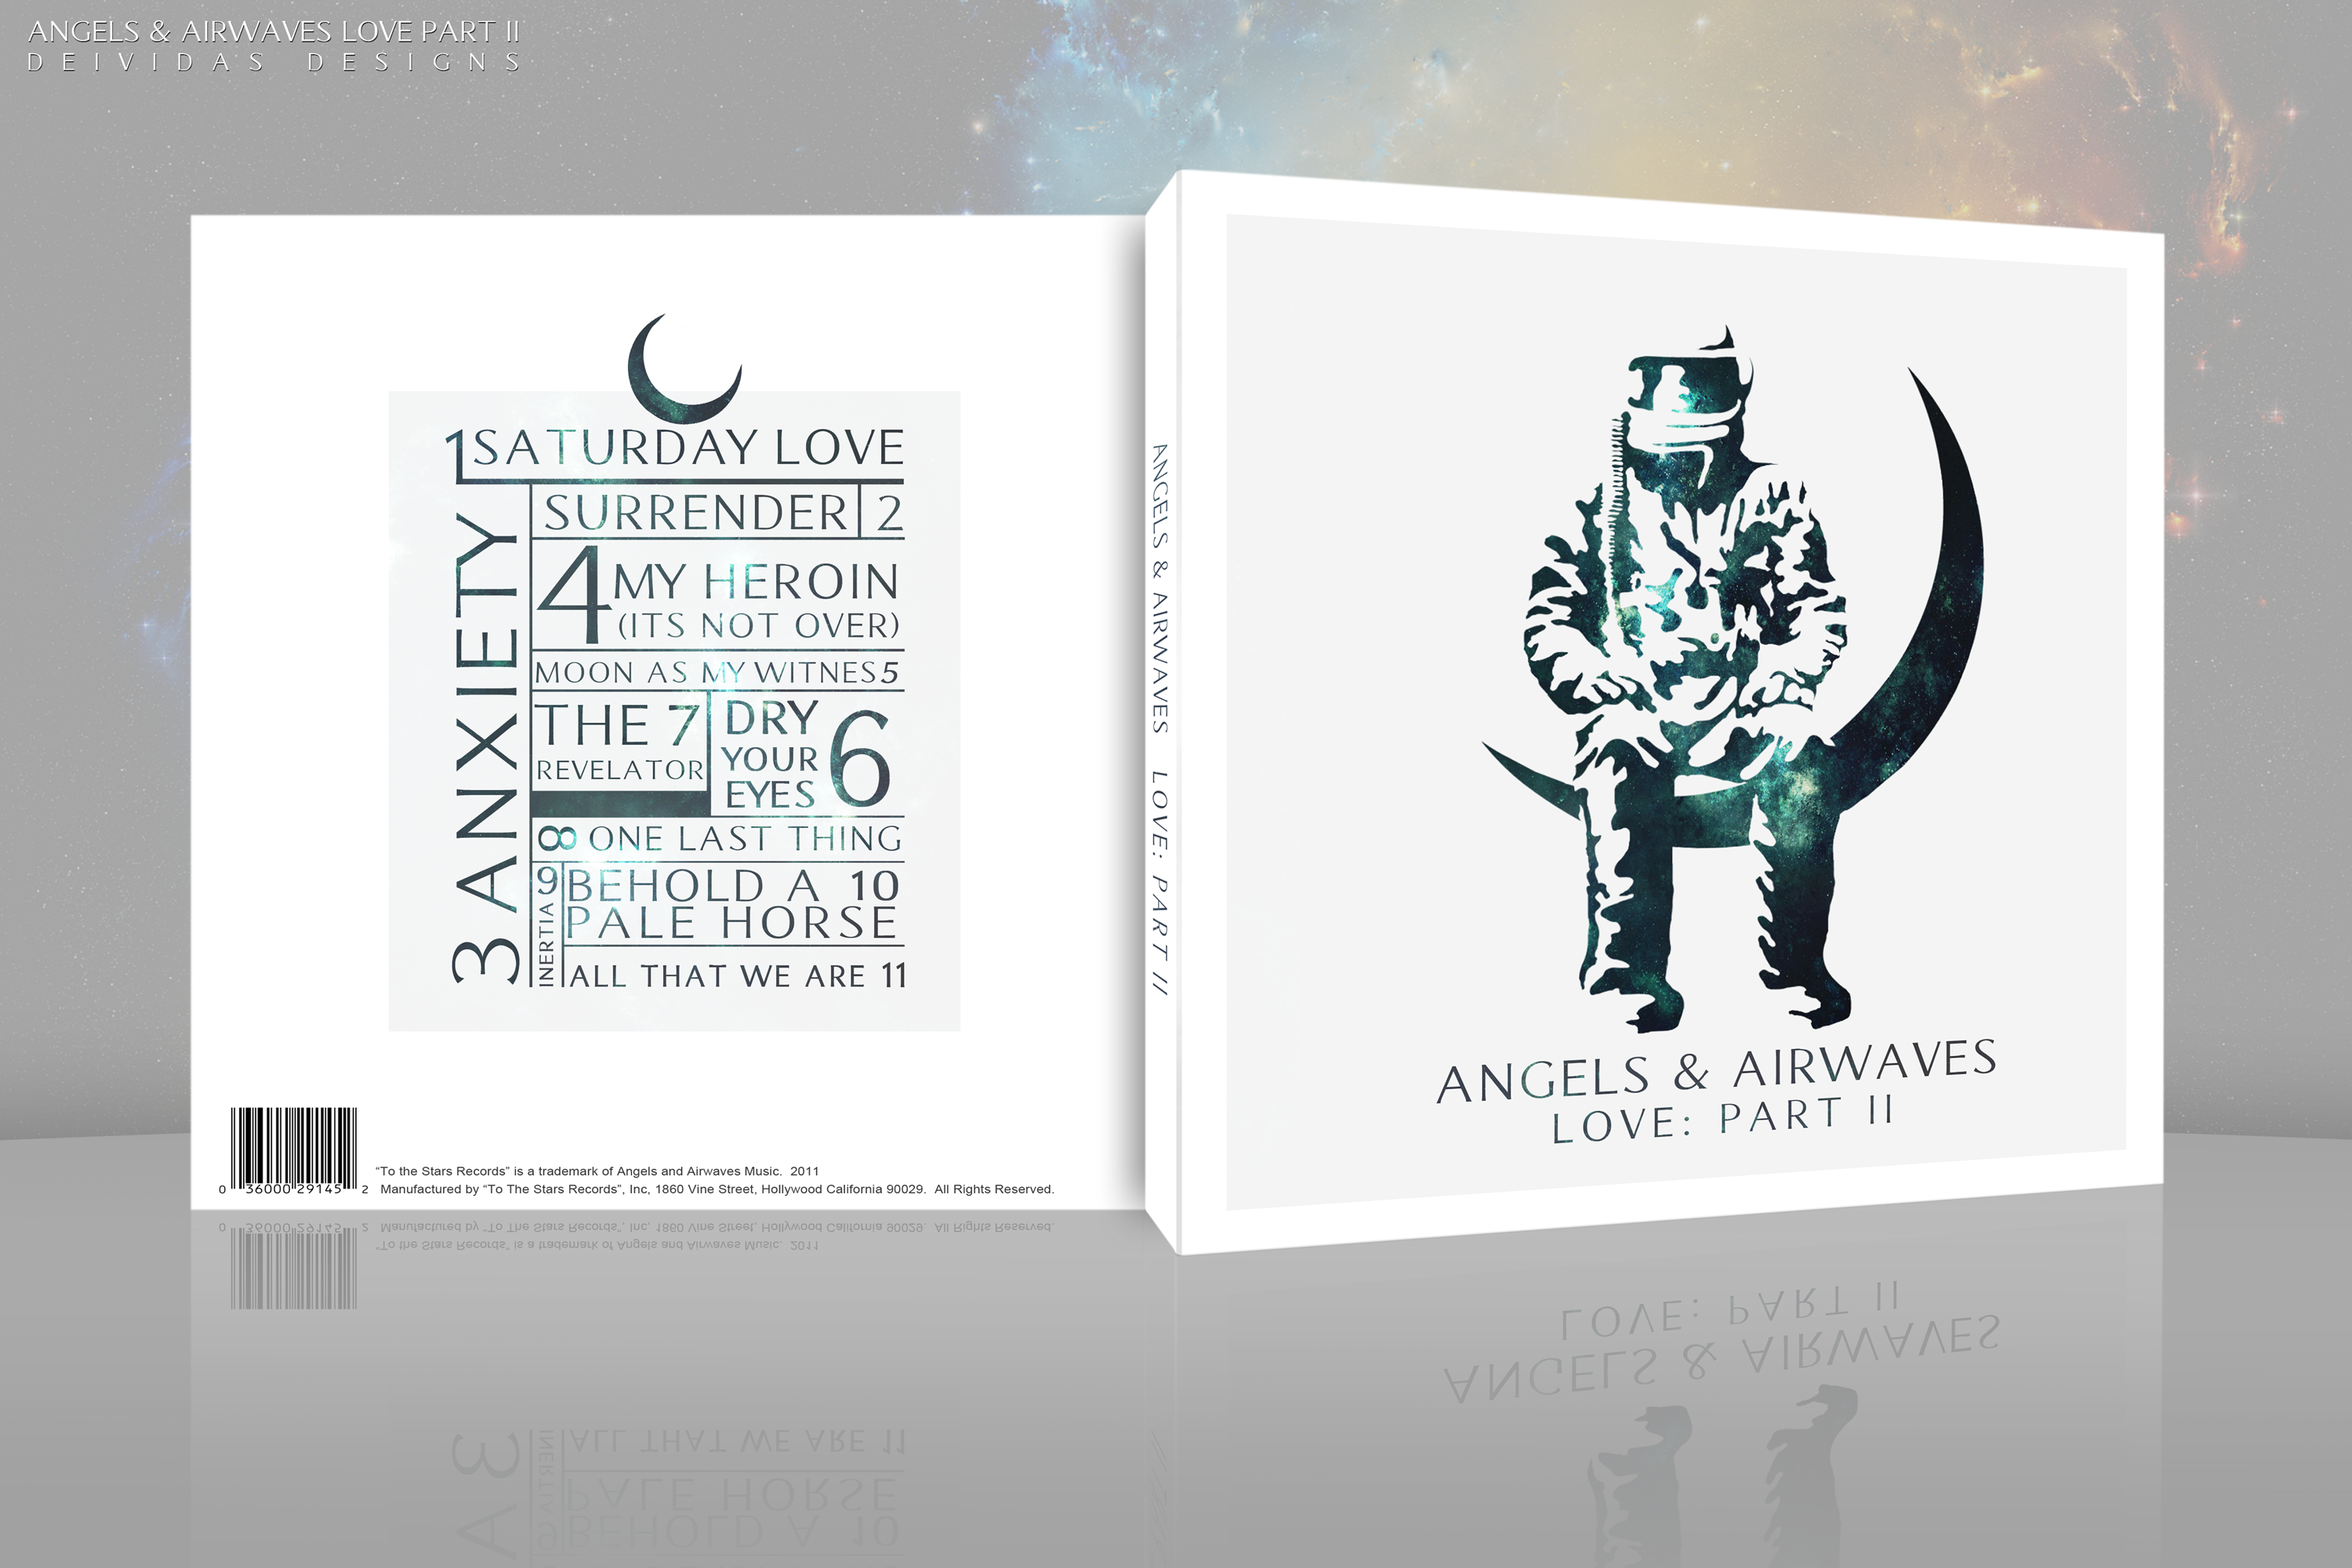 Angels and Airwaves: Love Part II box cover